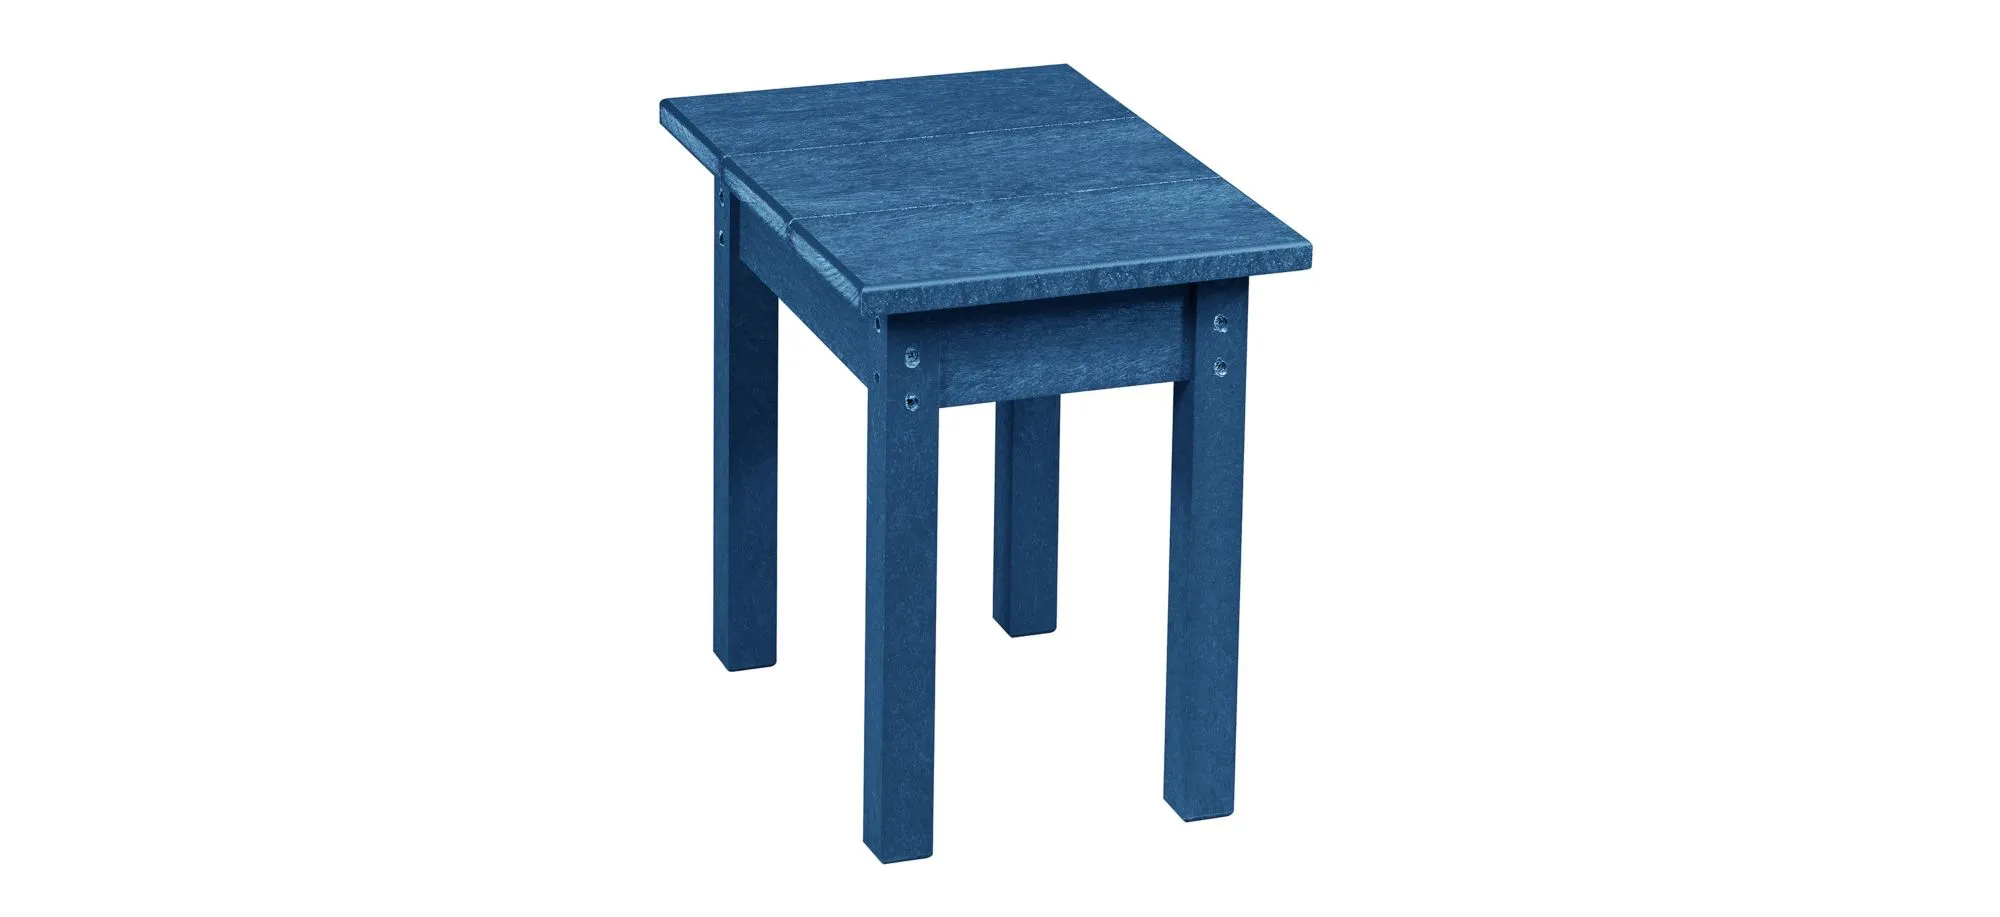 Capterra Casual Recycled Outdoor Side Table in Pacific Blue by C.R. Plastic Products